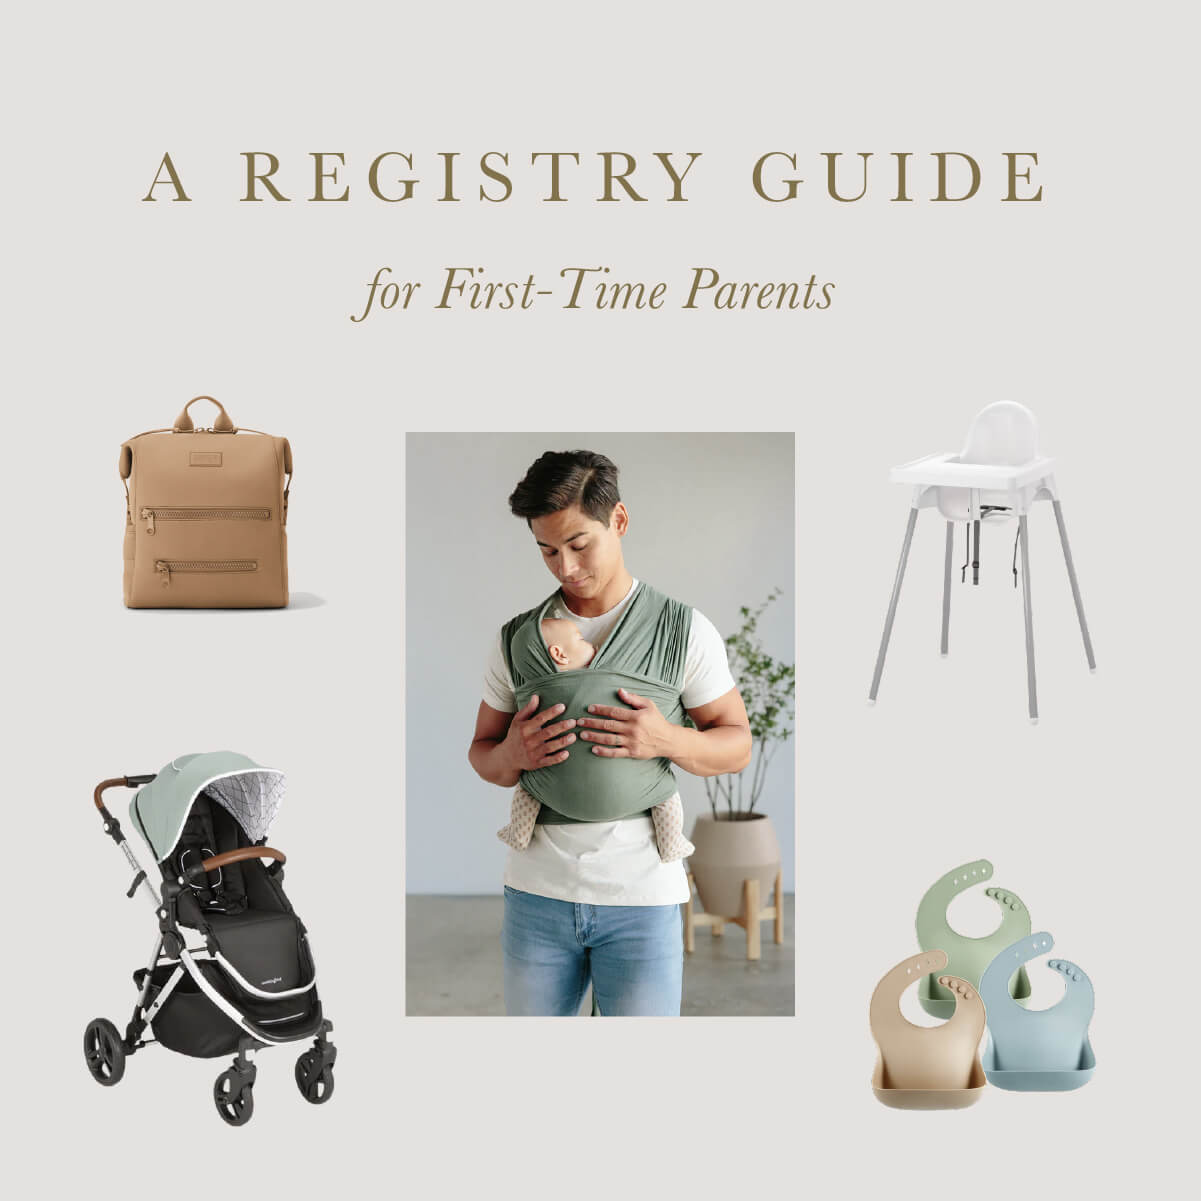 A Registry Guide for First-Time Parents